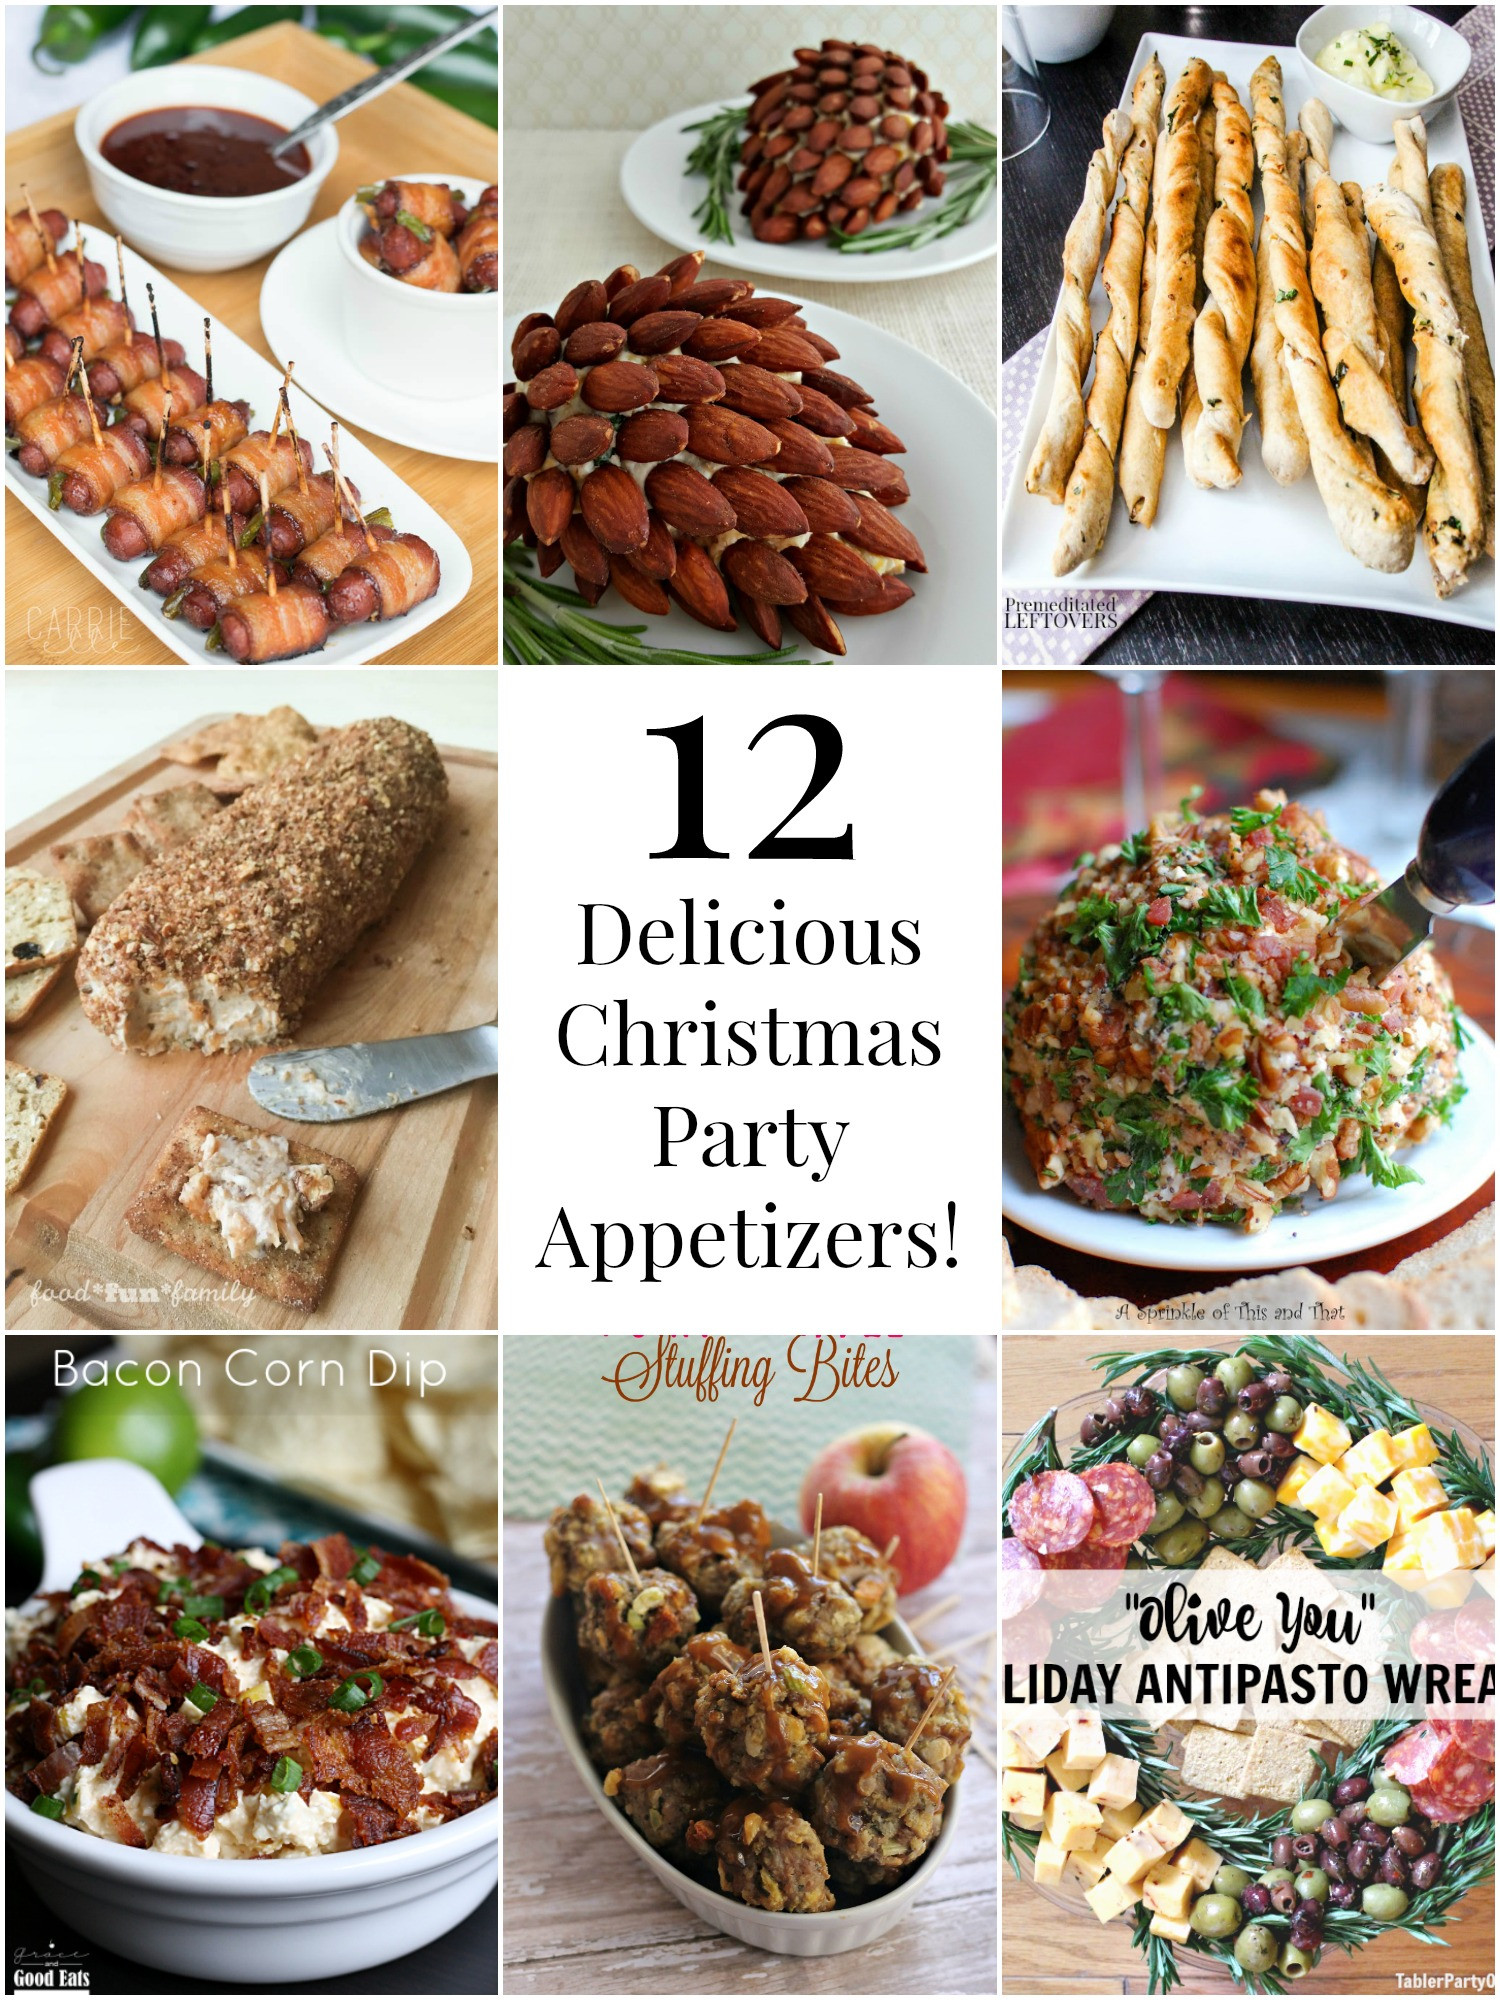 Holiday Party Appetizer Ideas
 So Creative 12 Delicious Christmas Party Appetizers